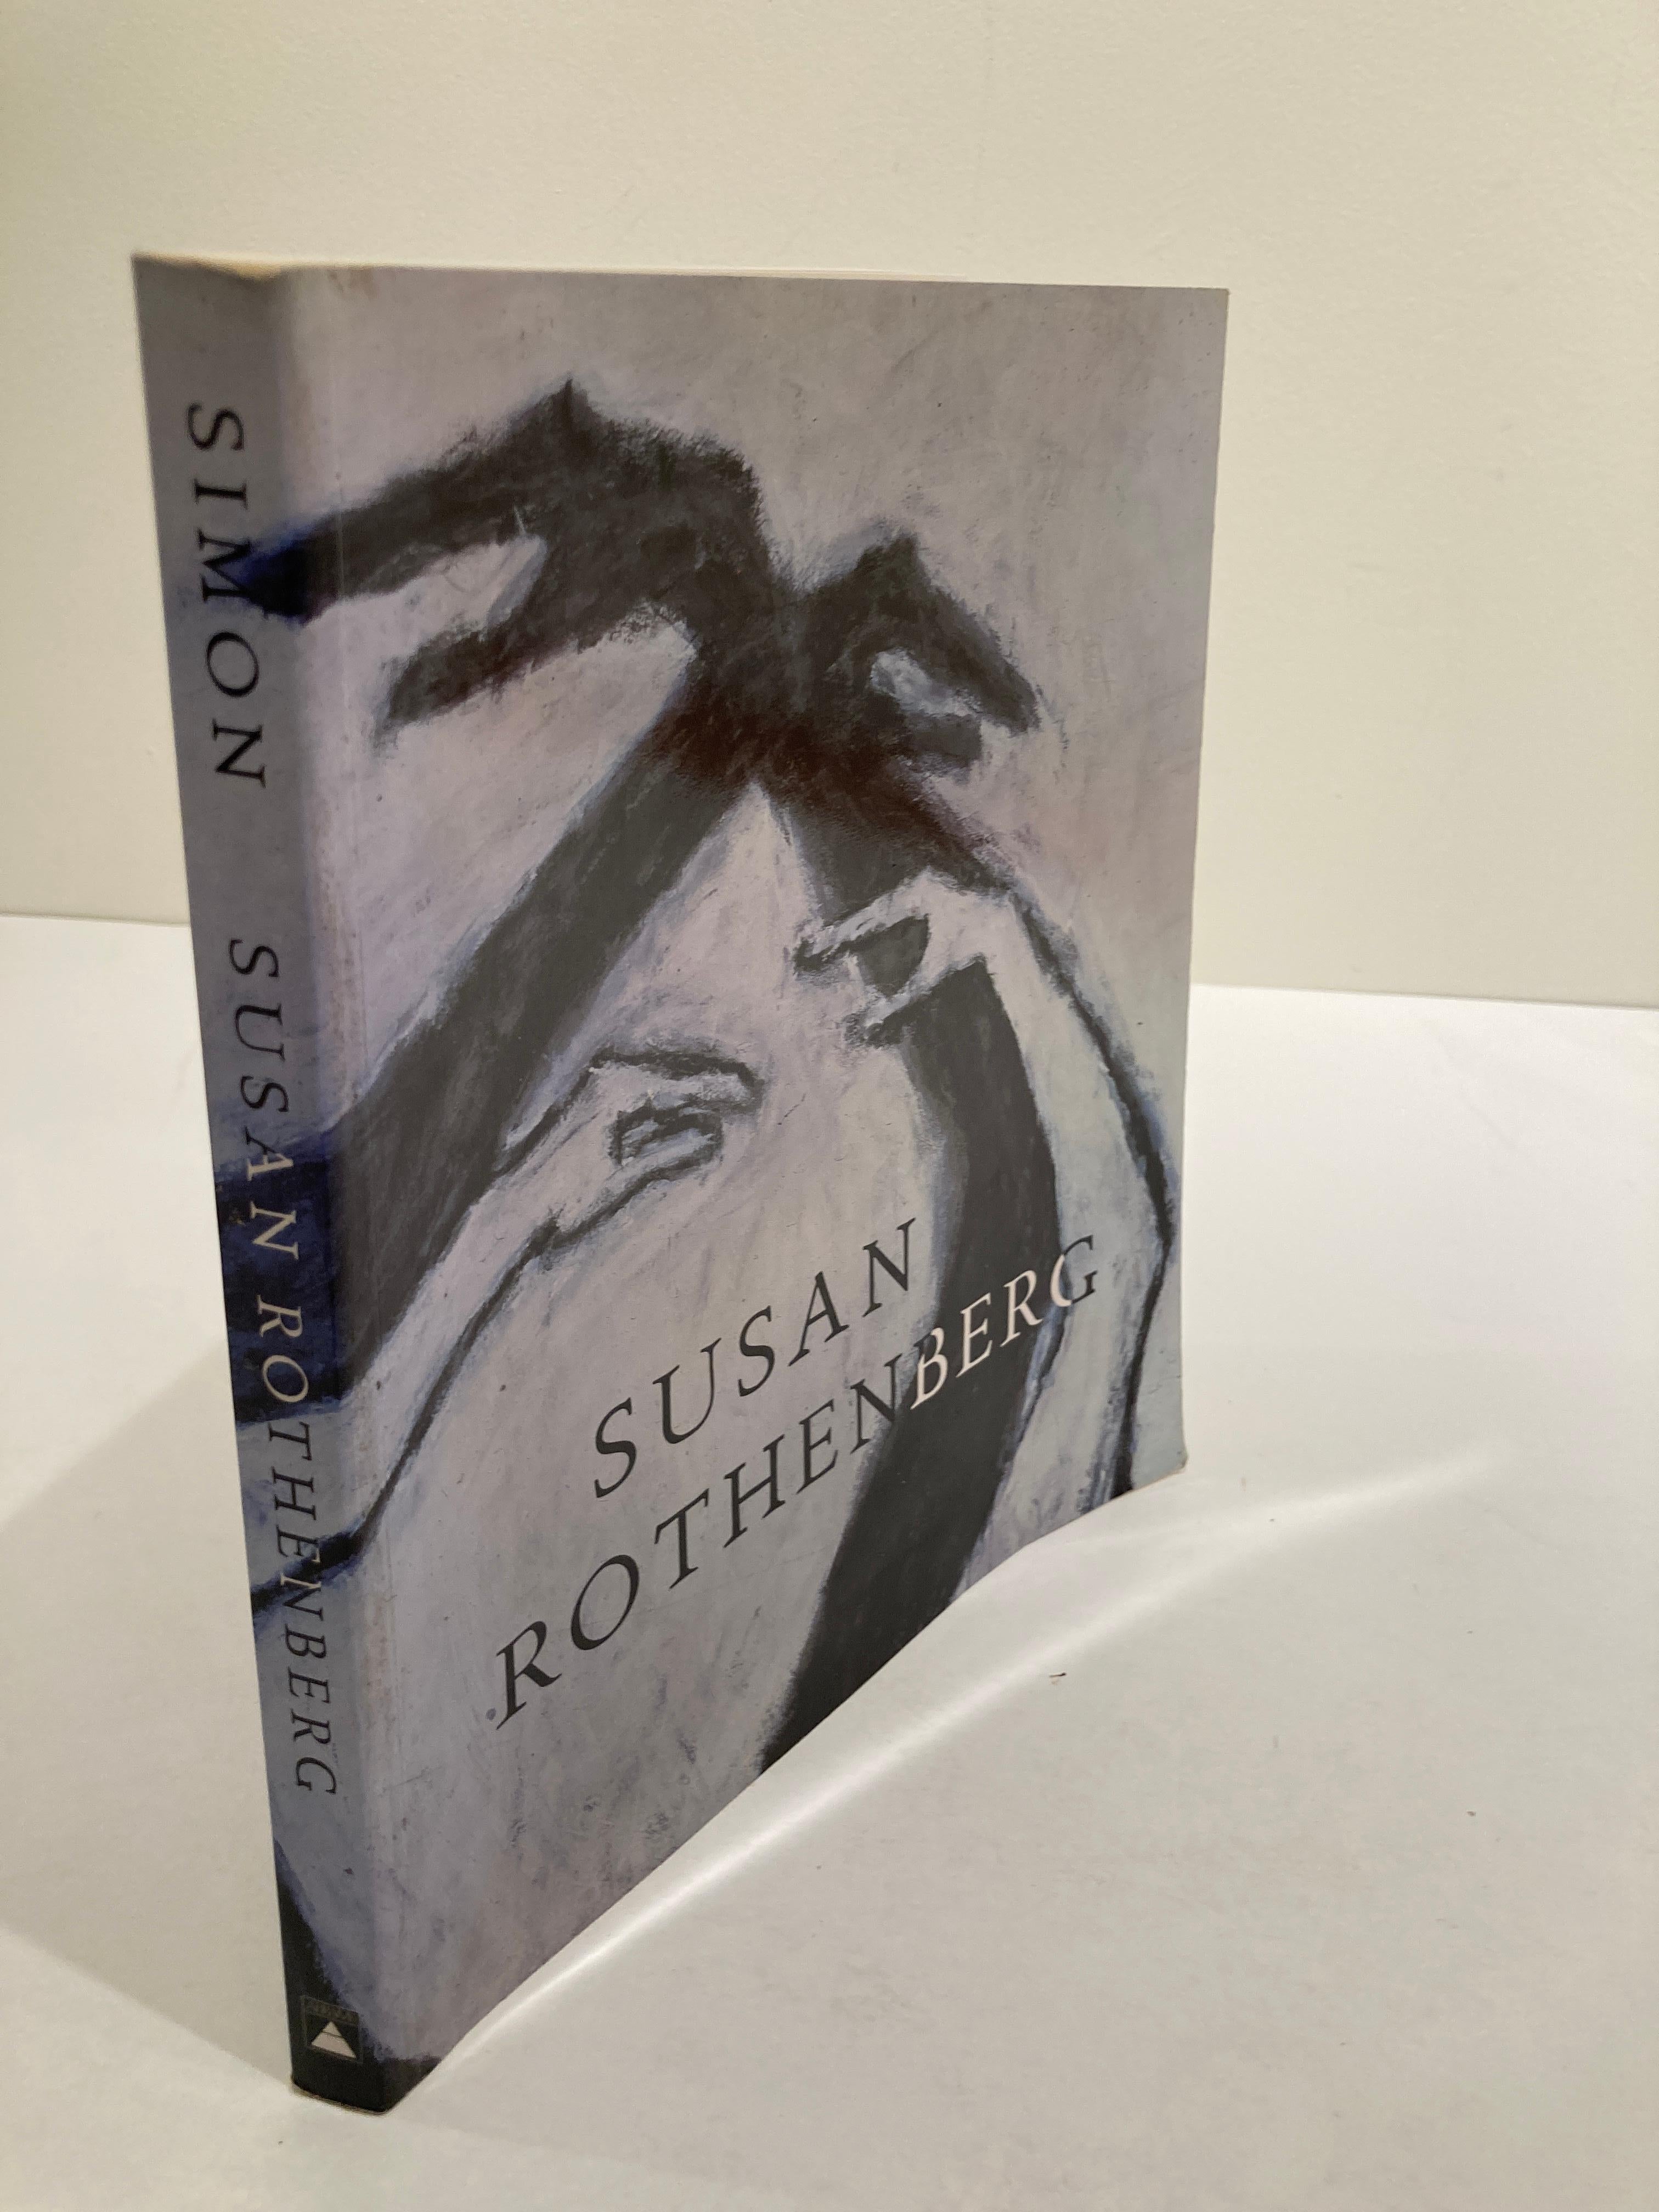 Paper Susan Rothenberg Collectible Contemporary Art Book by Joan Simon